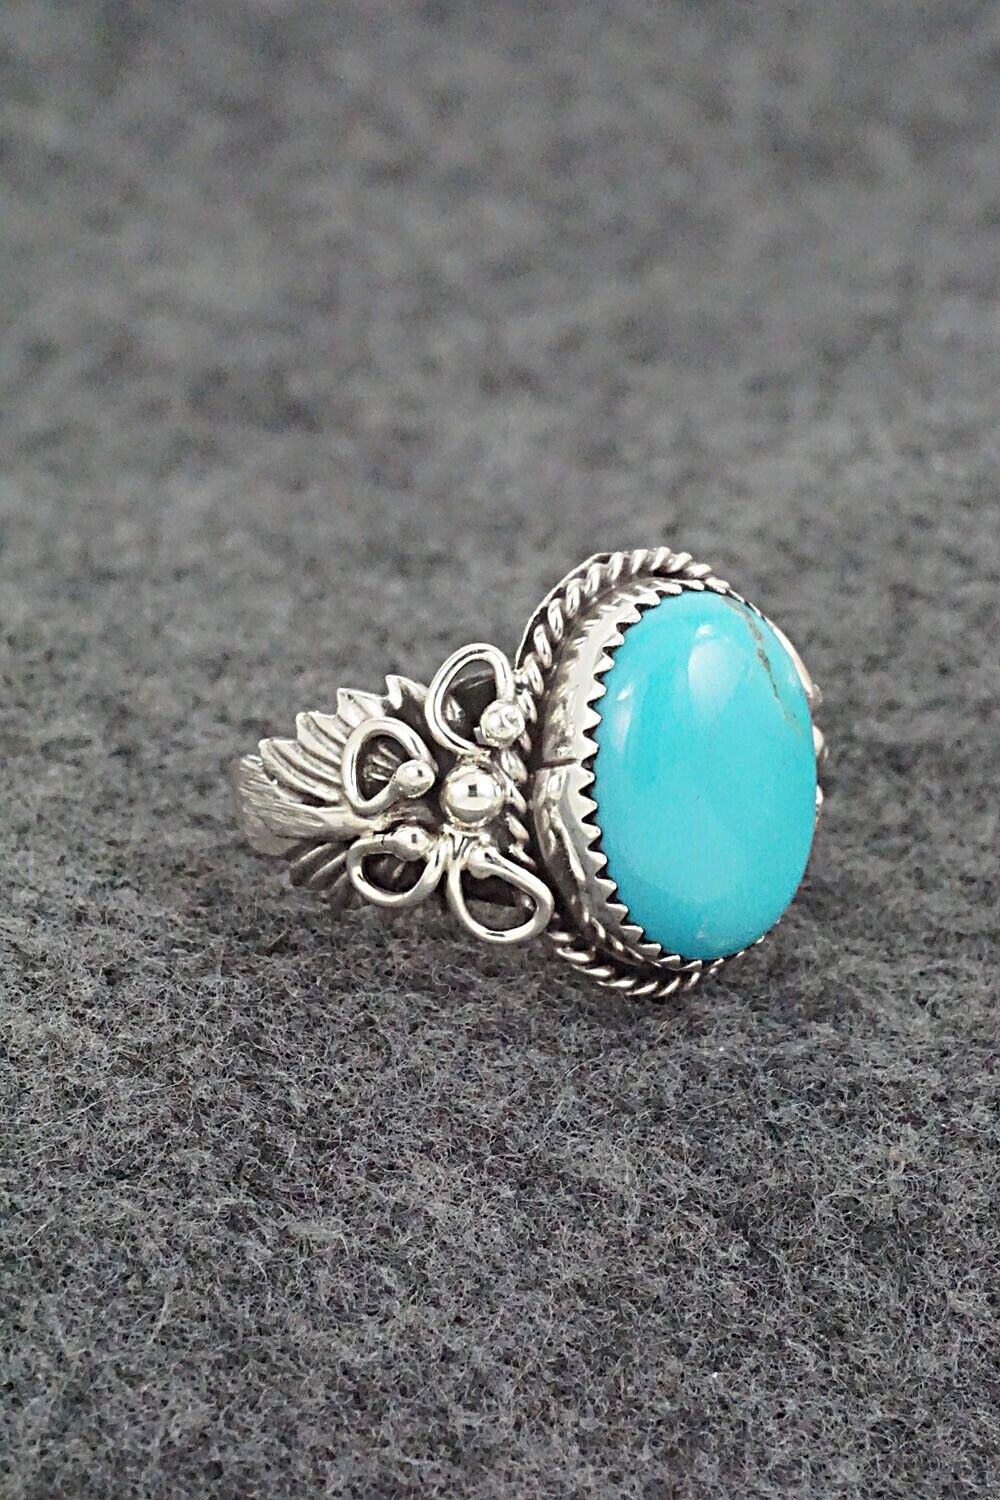 Turquoise & Sterling Silver Ring - Jeannette Saunders - Size 9